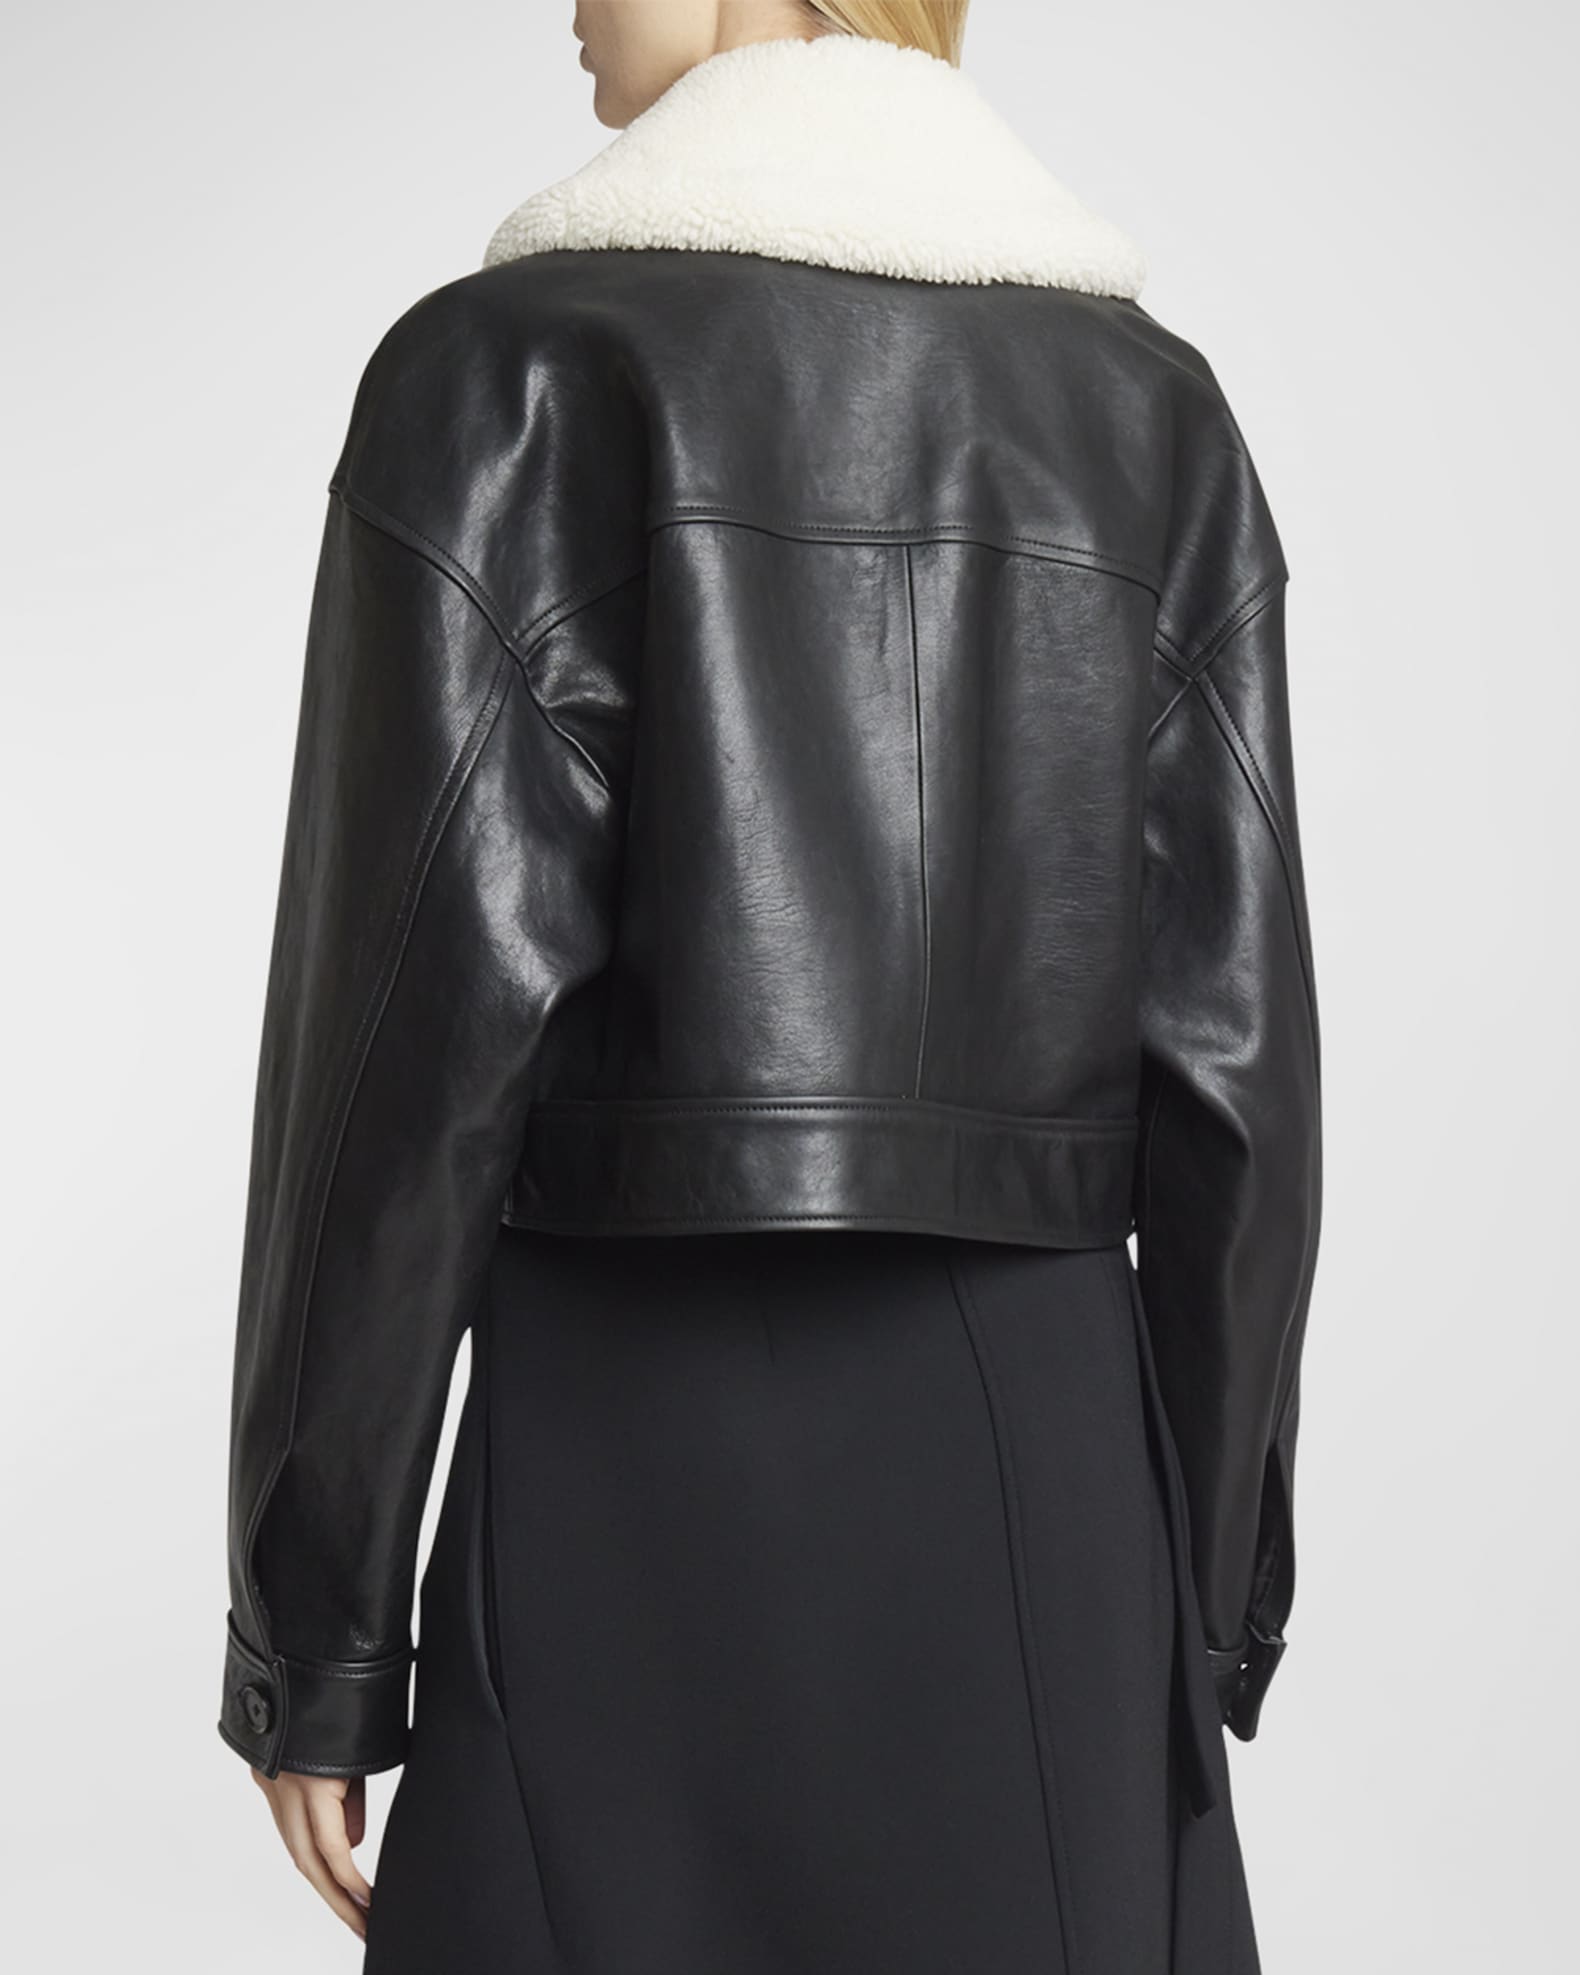 Proenza Schouler Judd Leather Jacket with Shearling Collar | Neiman Marcus